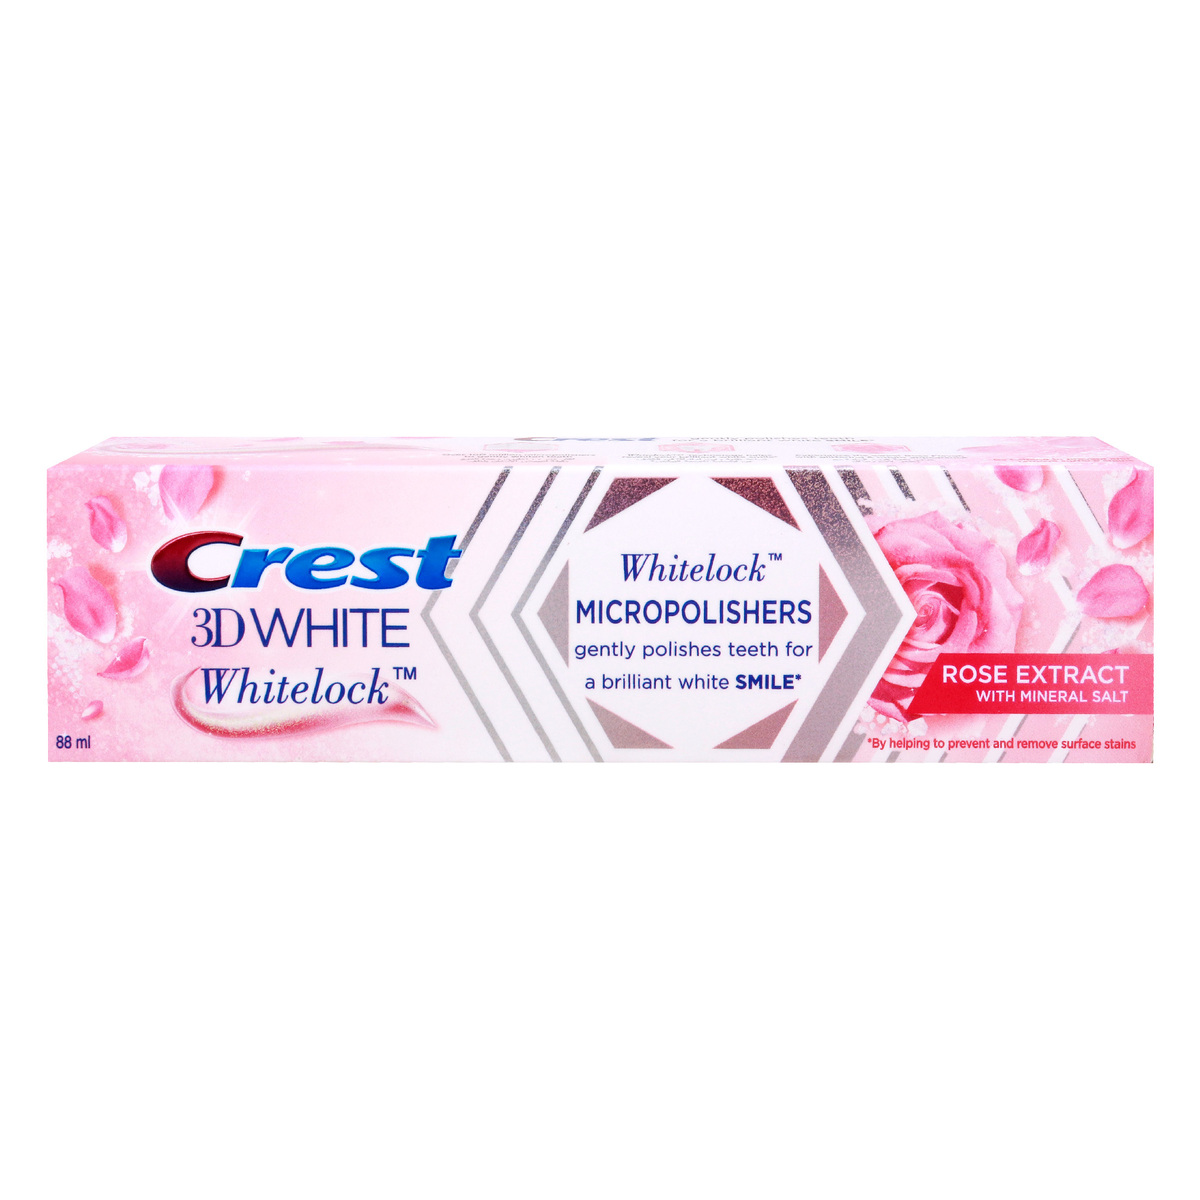 Crest 3D White Whitelock Micropolishers Rose Extract With Mineral Salt Toothpaste 88 ml